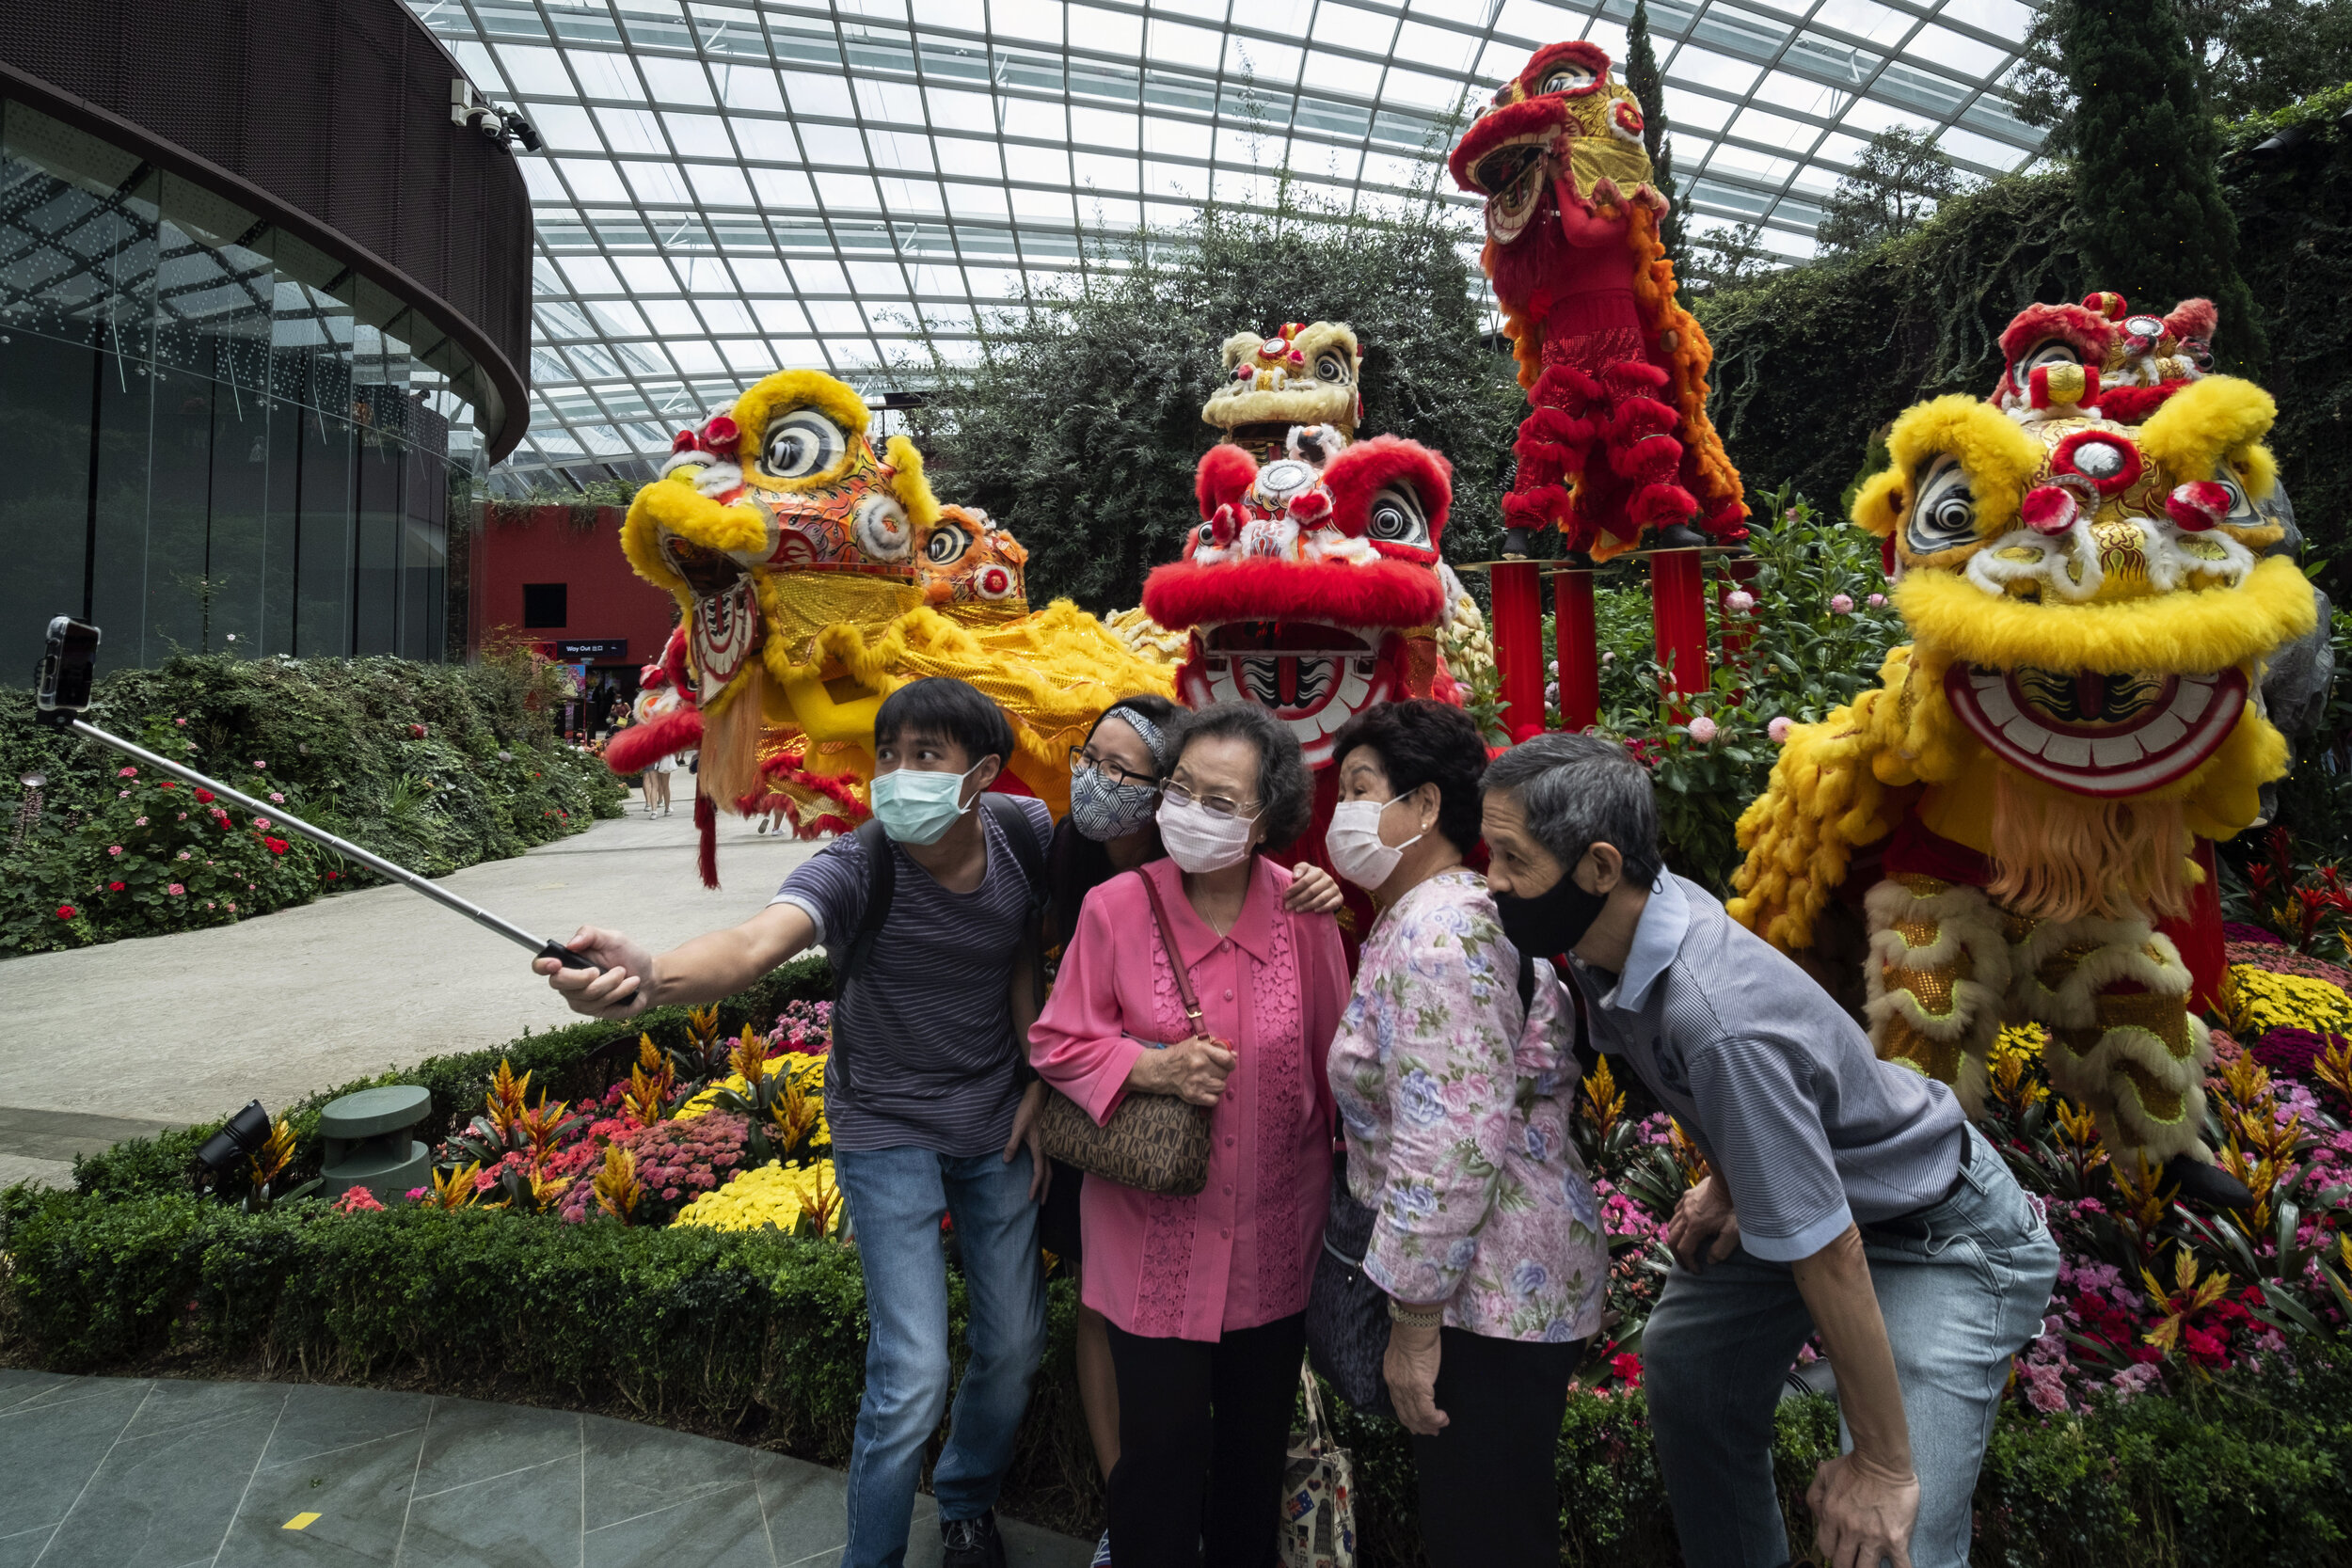  A family pose for a wefie while wearing their face masks during the annual Dahlia Dreams floral display ahead of the Chinese Lunar New Year of the Ox, otherwise known as the Spring Festival, at Singapore's Gardens by the Bay, January 31, 2021. REUTE